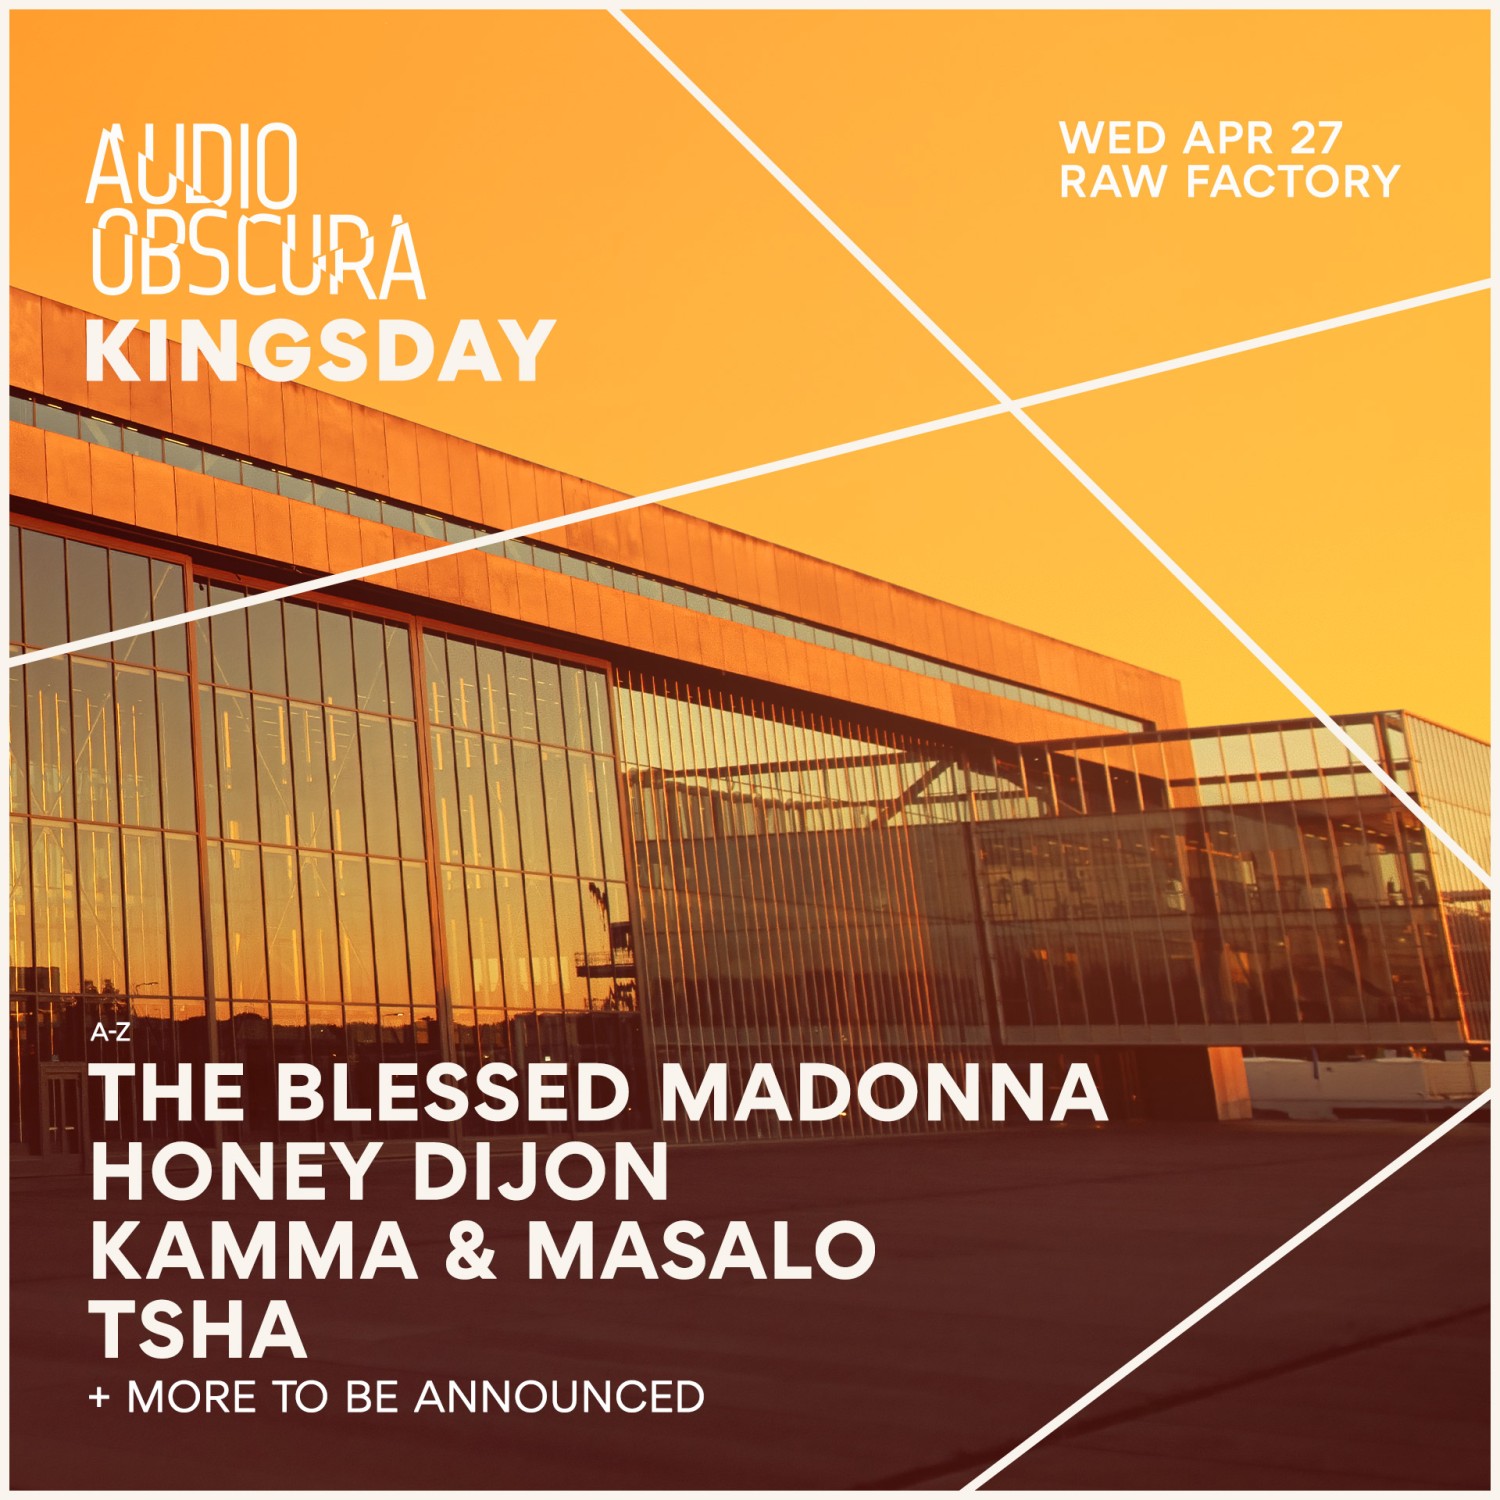 Audio Obscura Kingsday